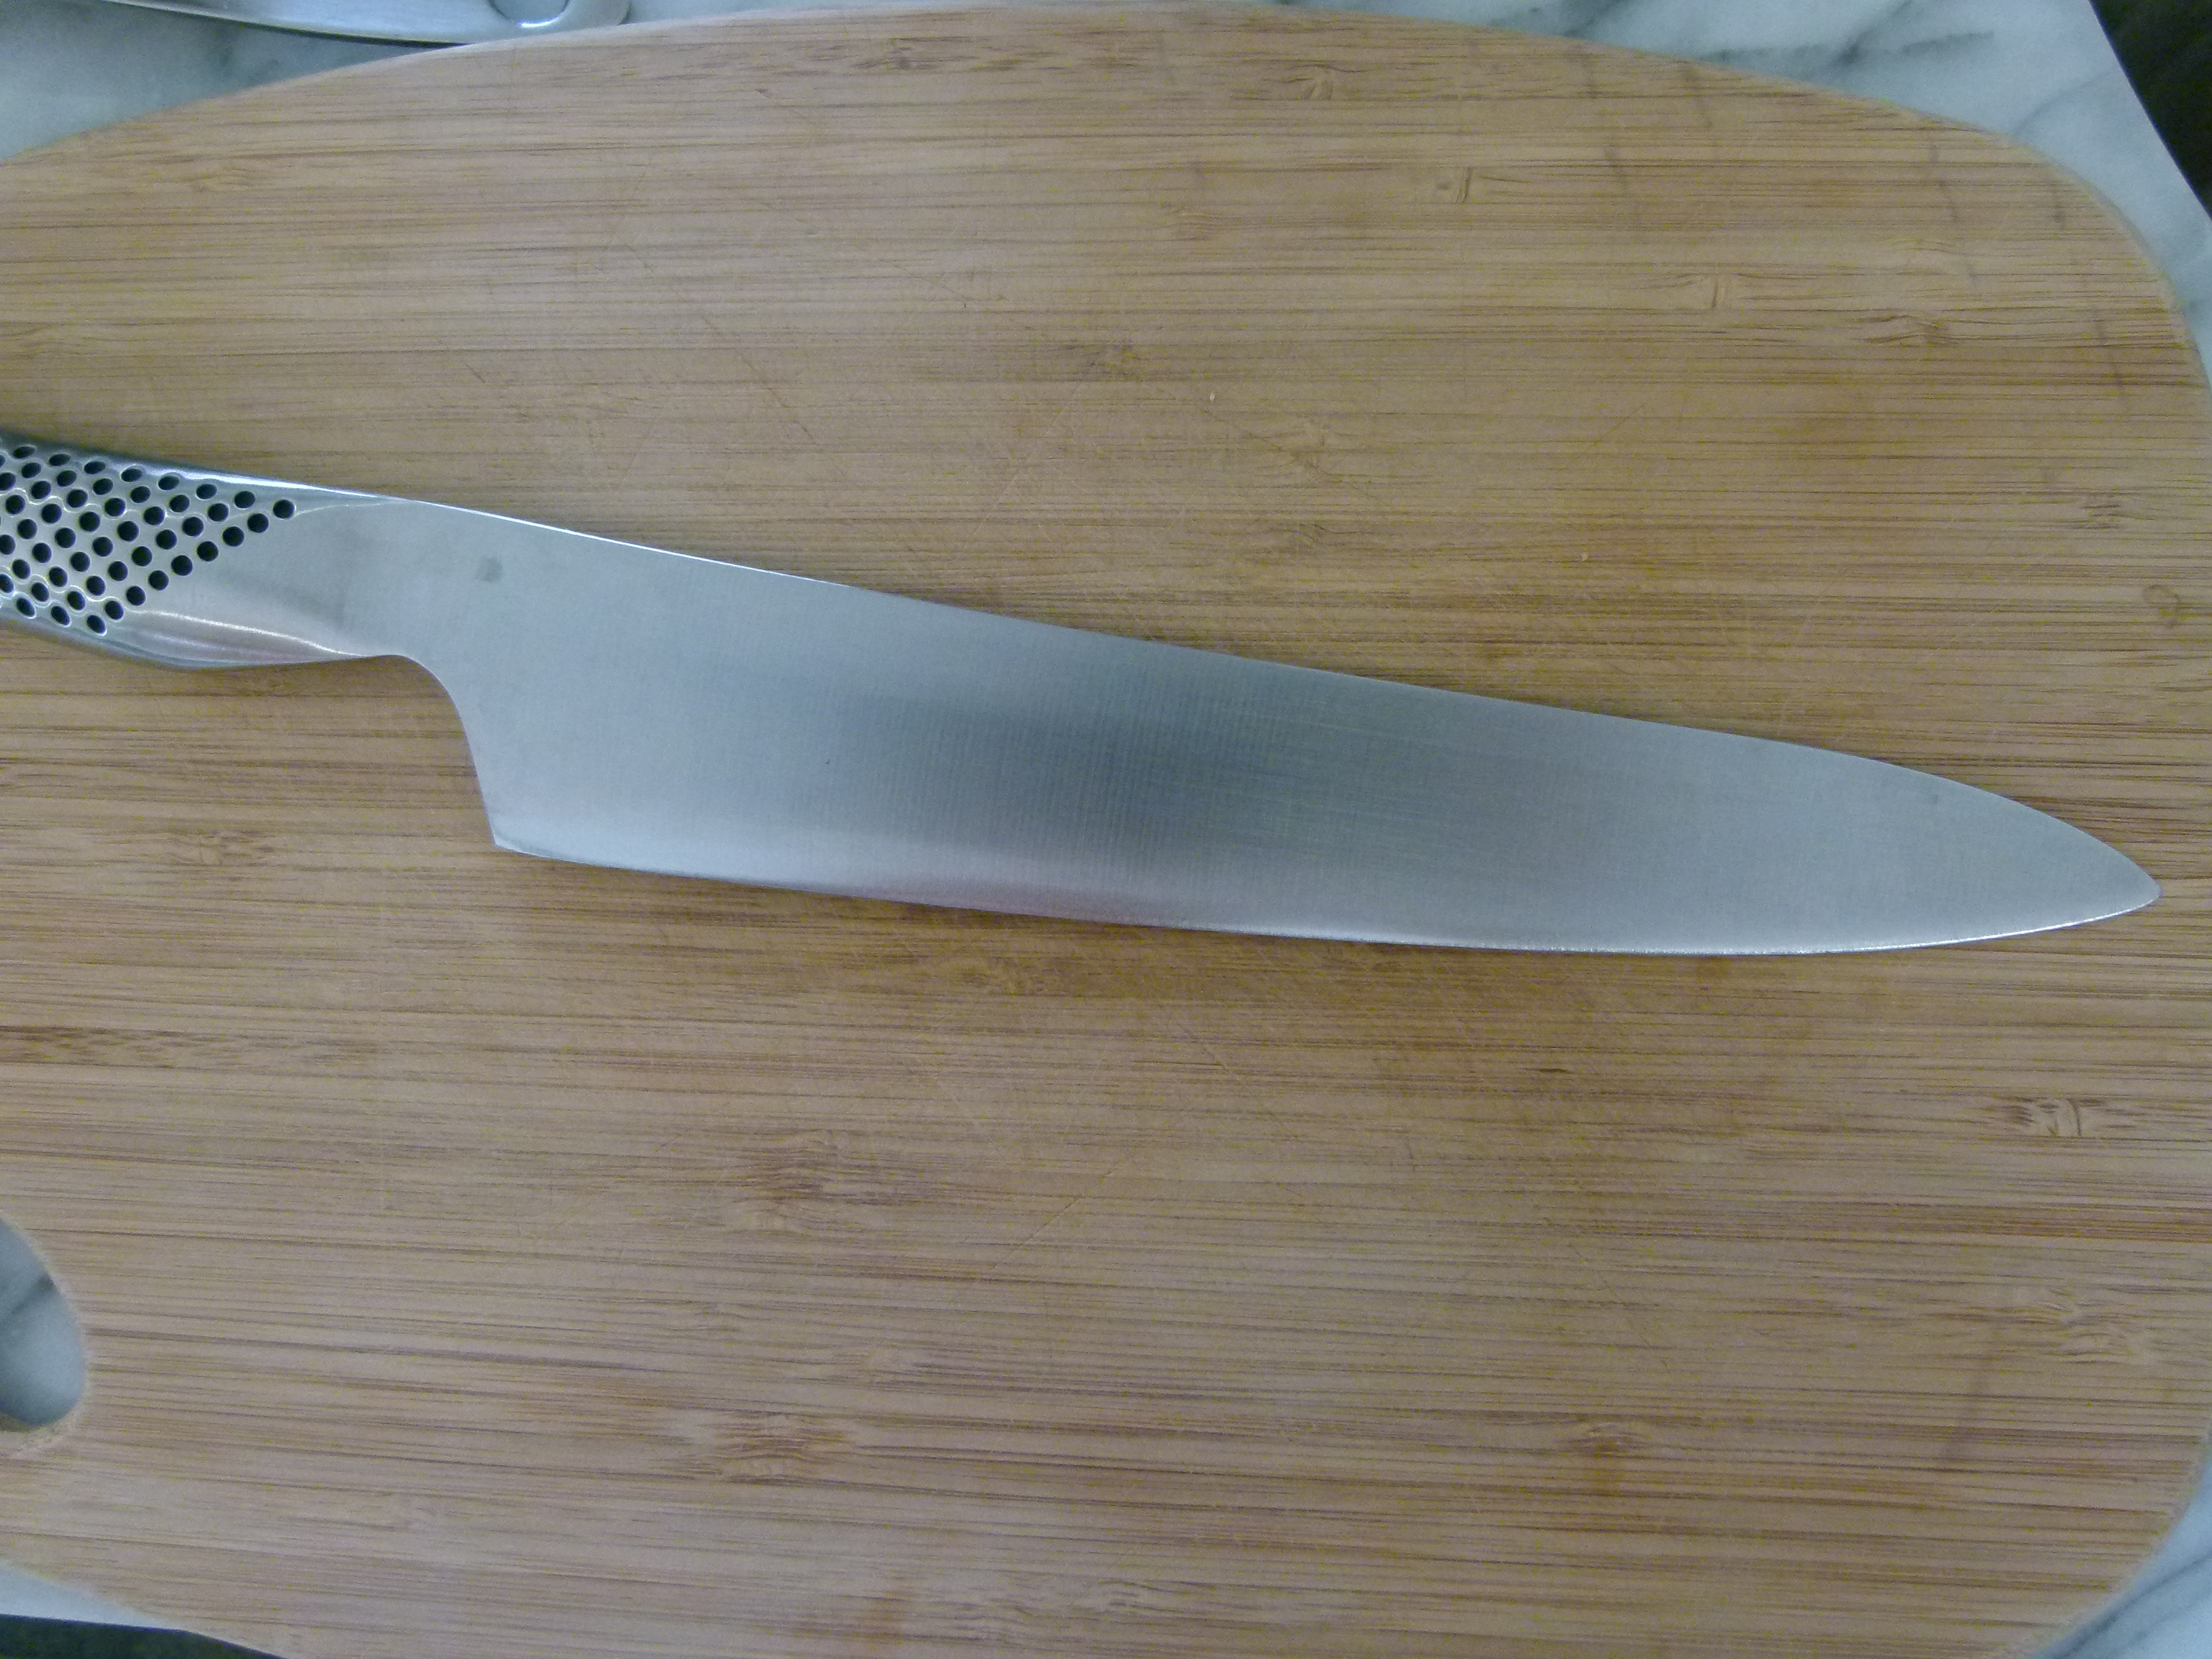 How to Care For Your Knives So They Last Long and Stay Sharp